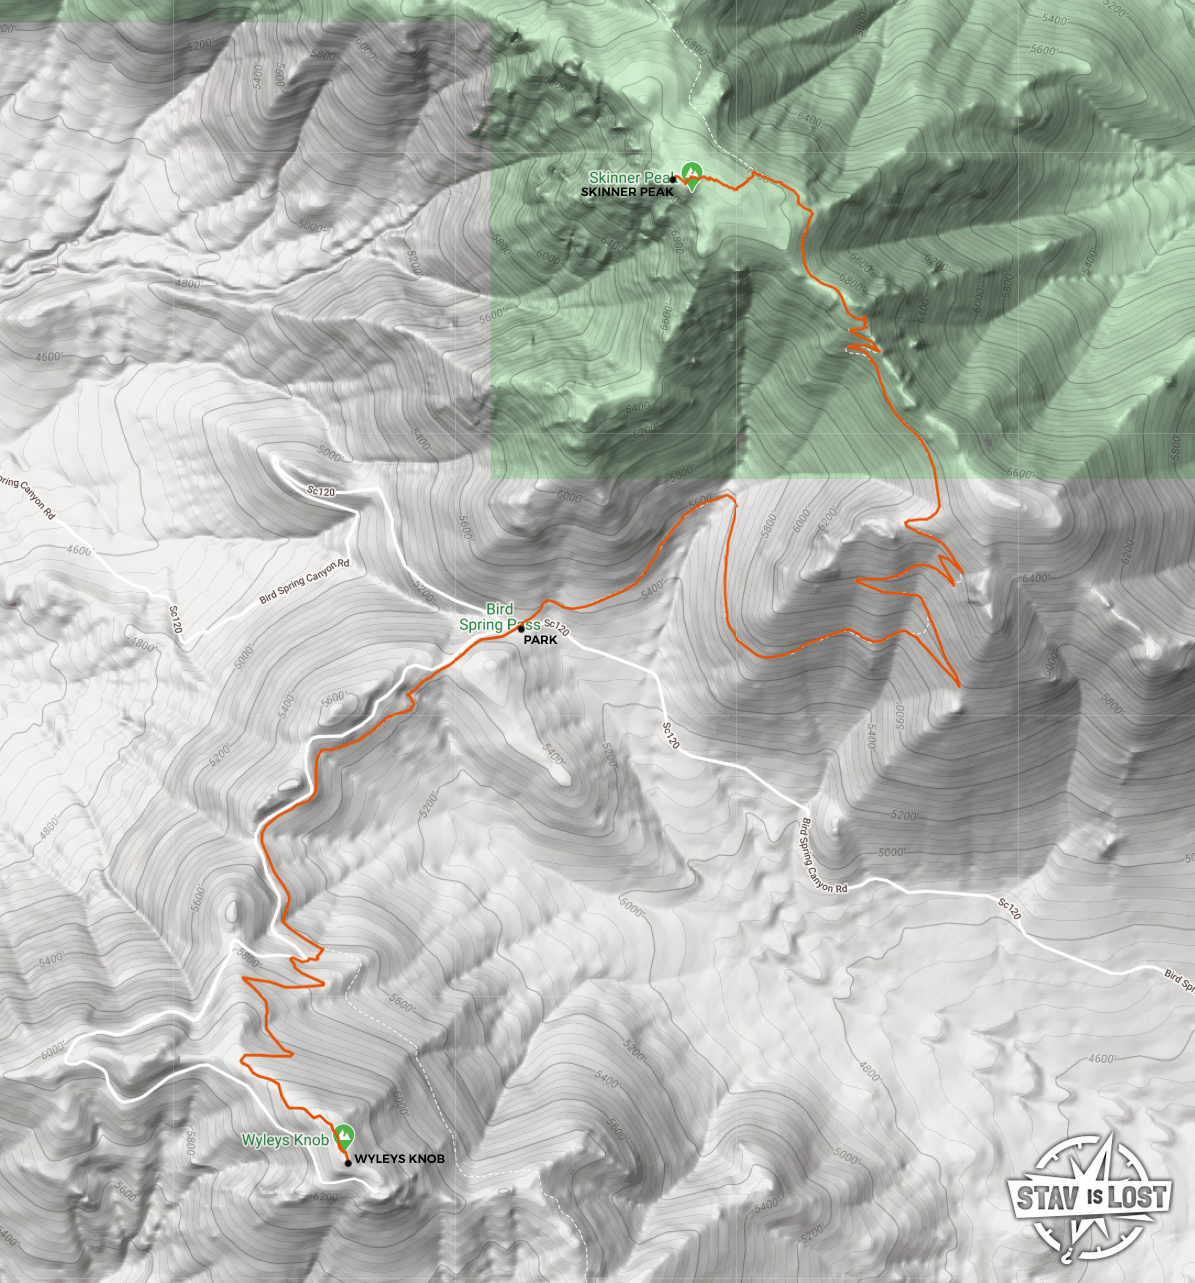 map for Skinner Peak and Wyleys Knob by stav is lost